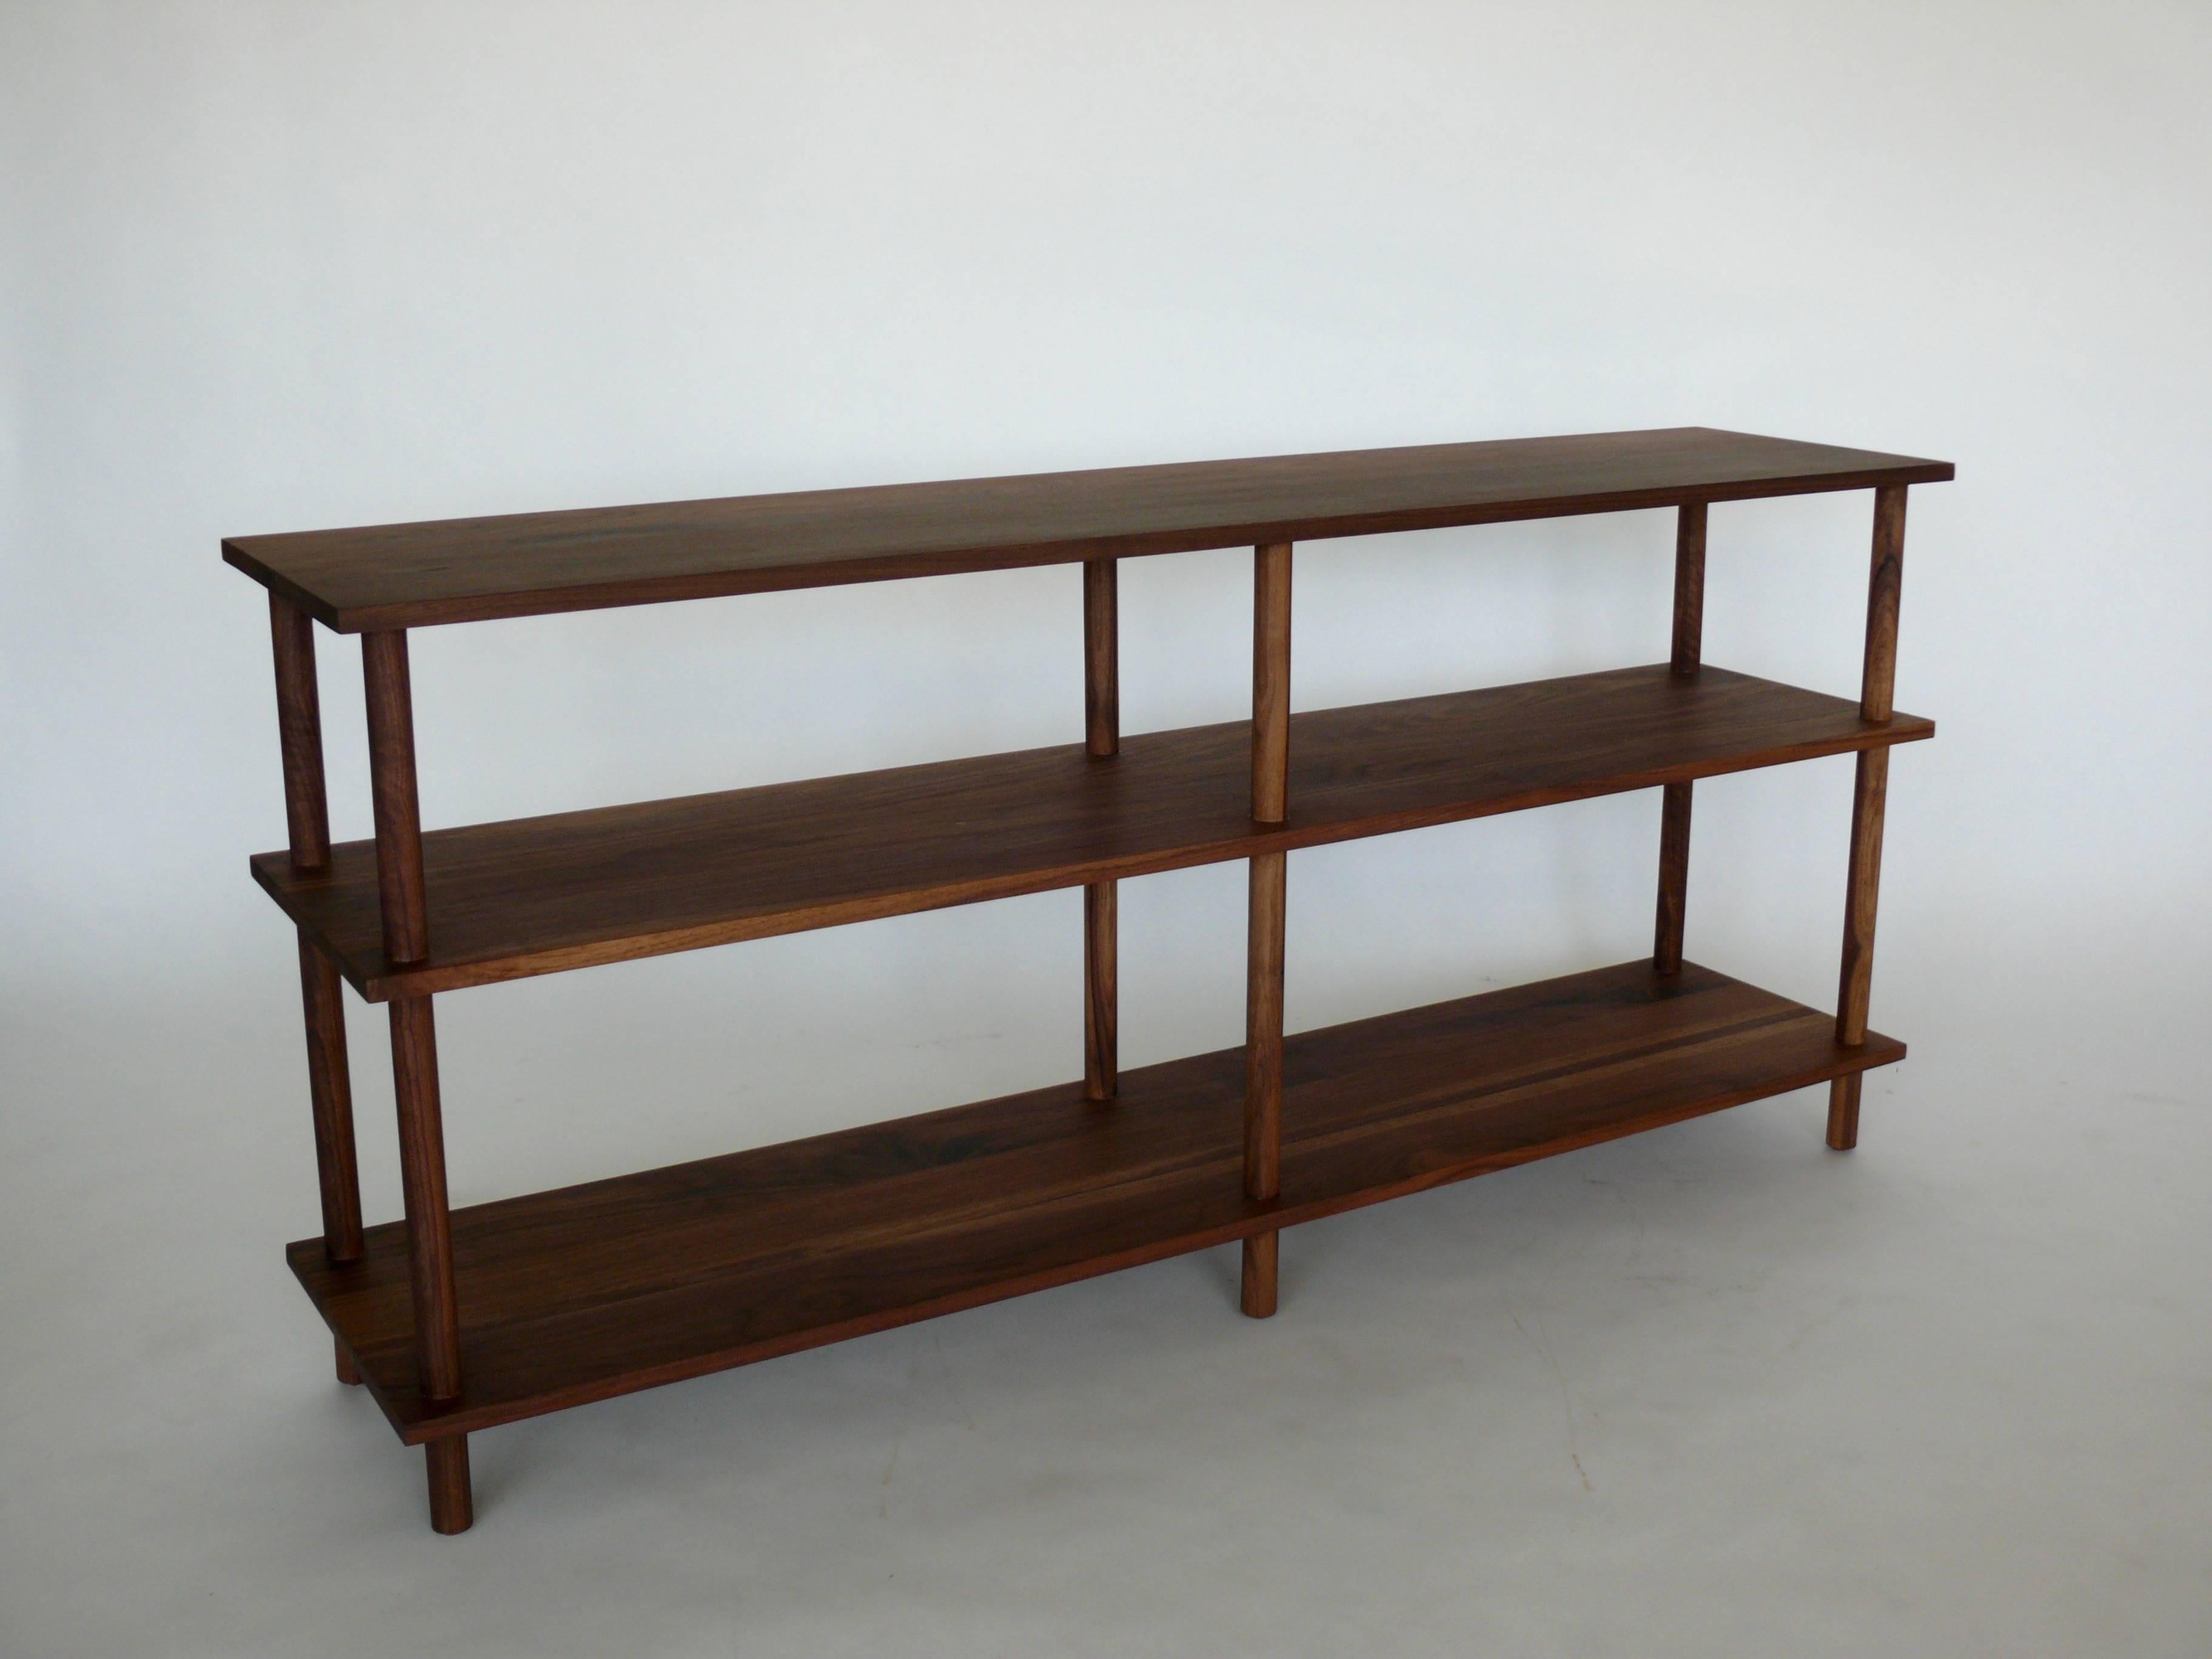 Handsome newly produced walnut bookcase, shelf or console. Waxed finish. Beautiful wood with great grain detail. Functional piece with three shelves. Great for the home or office.